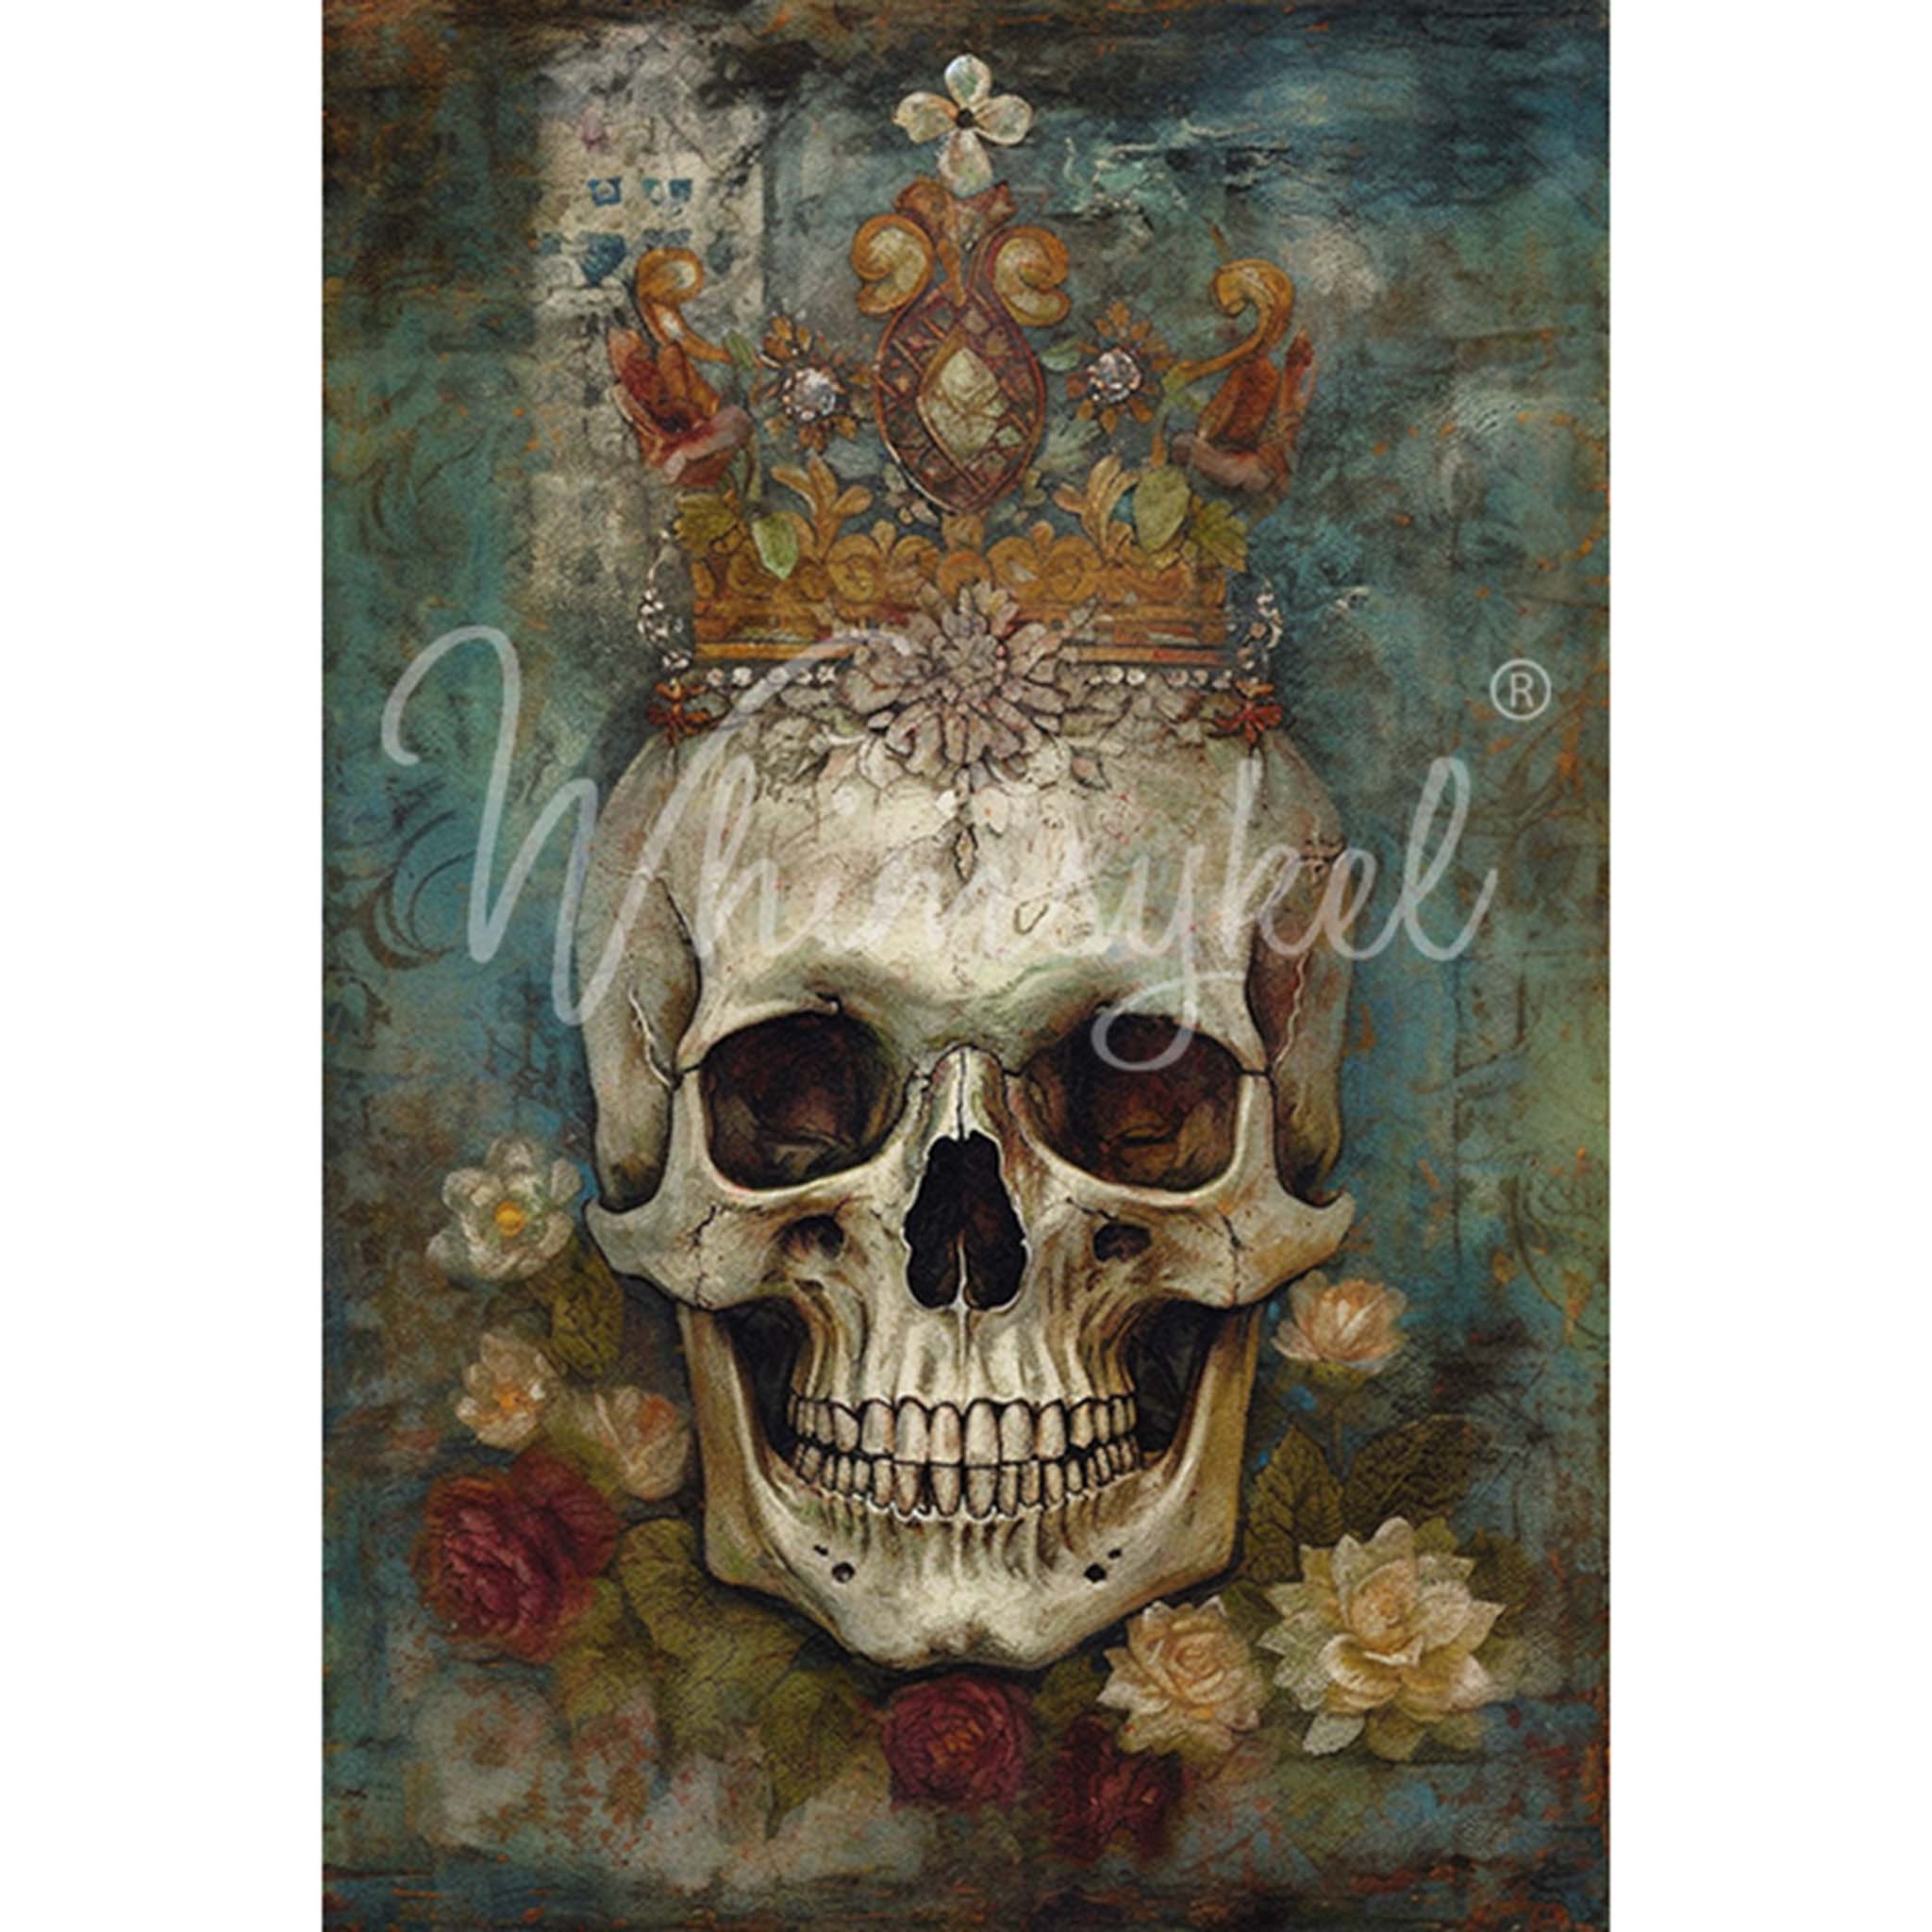 Whimsykel's Skull Queen tissue paper that features dark and magical design of a skull with a crown and flowers. White borders are on the sides.